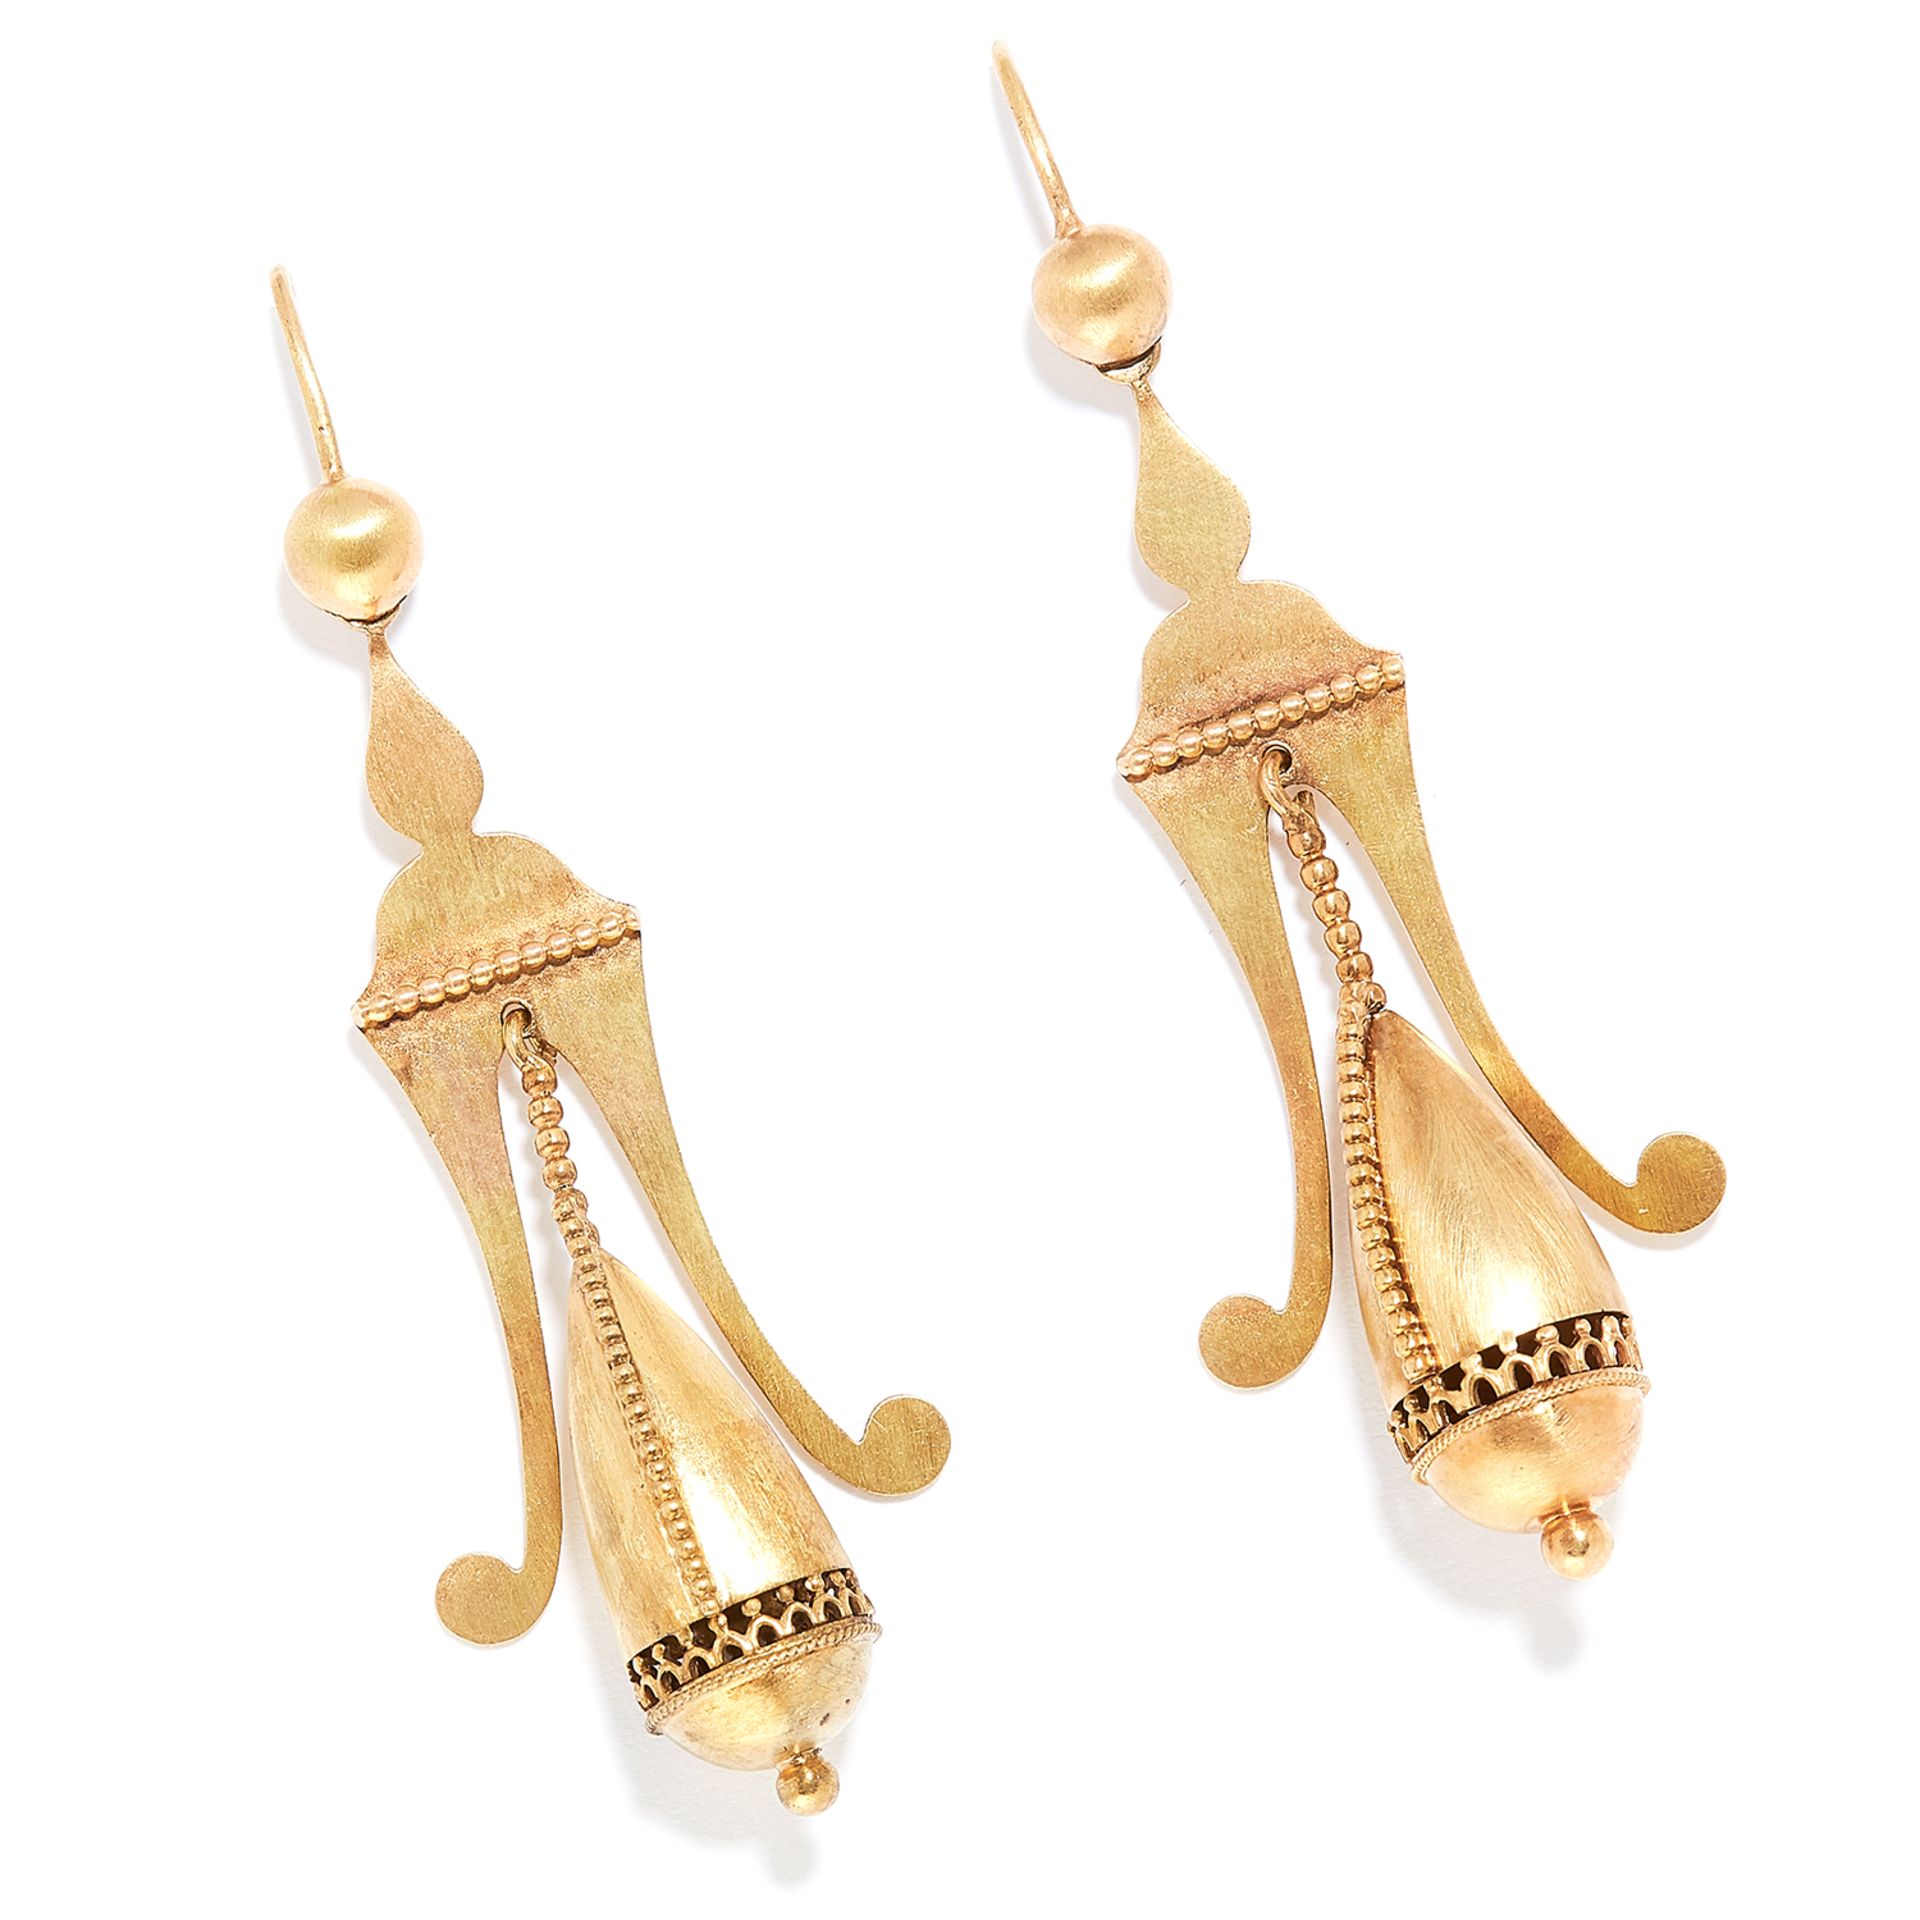 ANTIQUE ETRUSCAN REVIVAL EARRINGS, 19TH CENTURY in high carat yellow gold, in Etruscan revival style